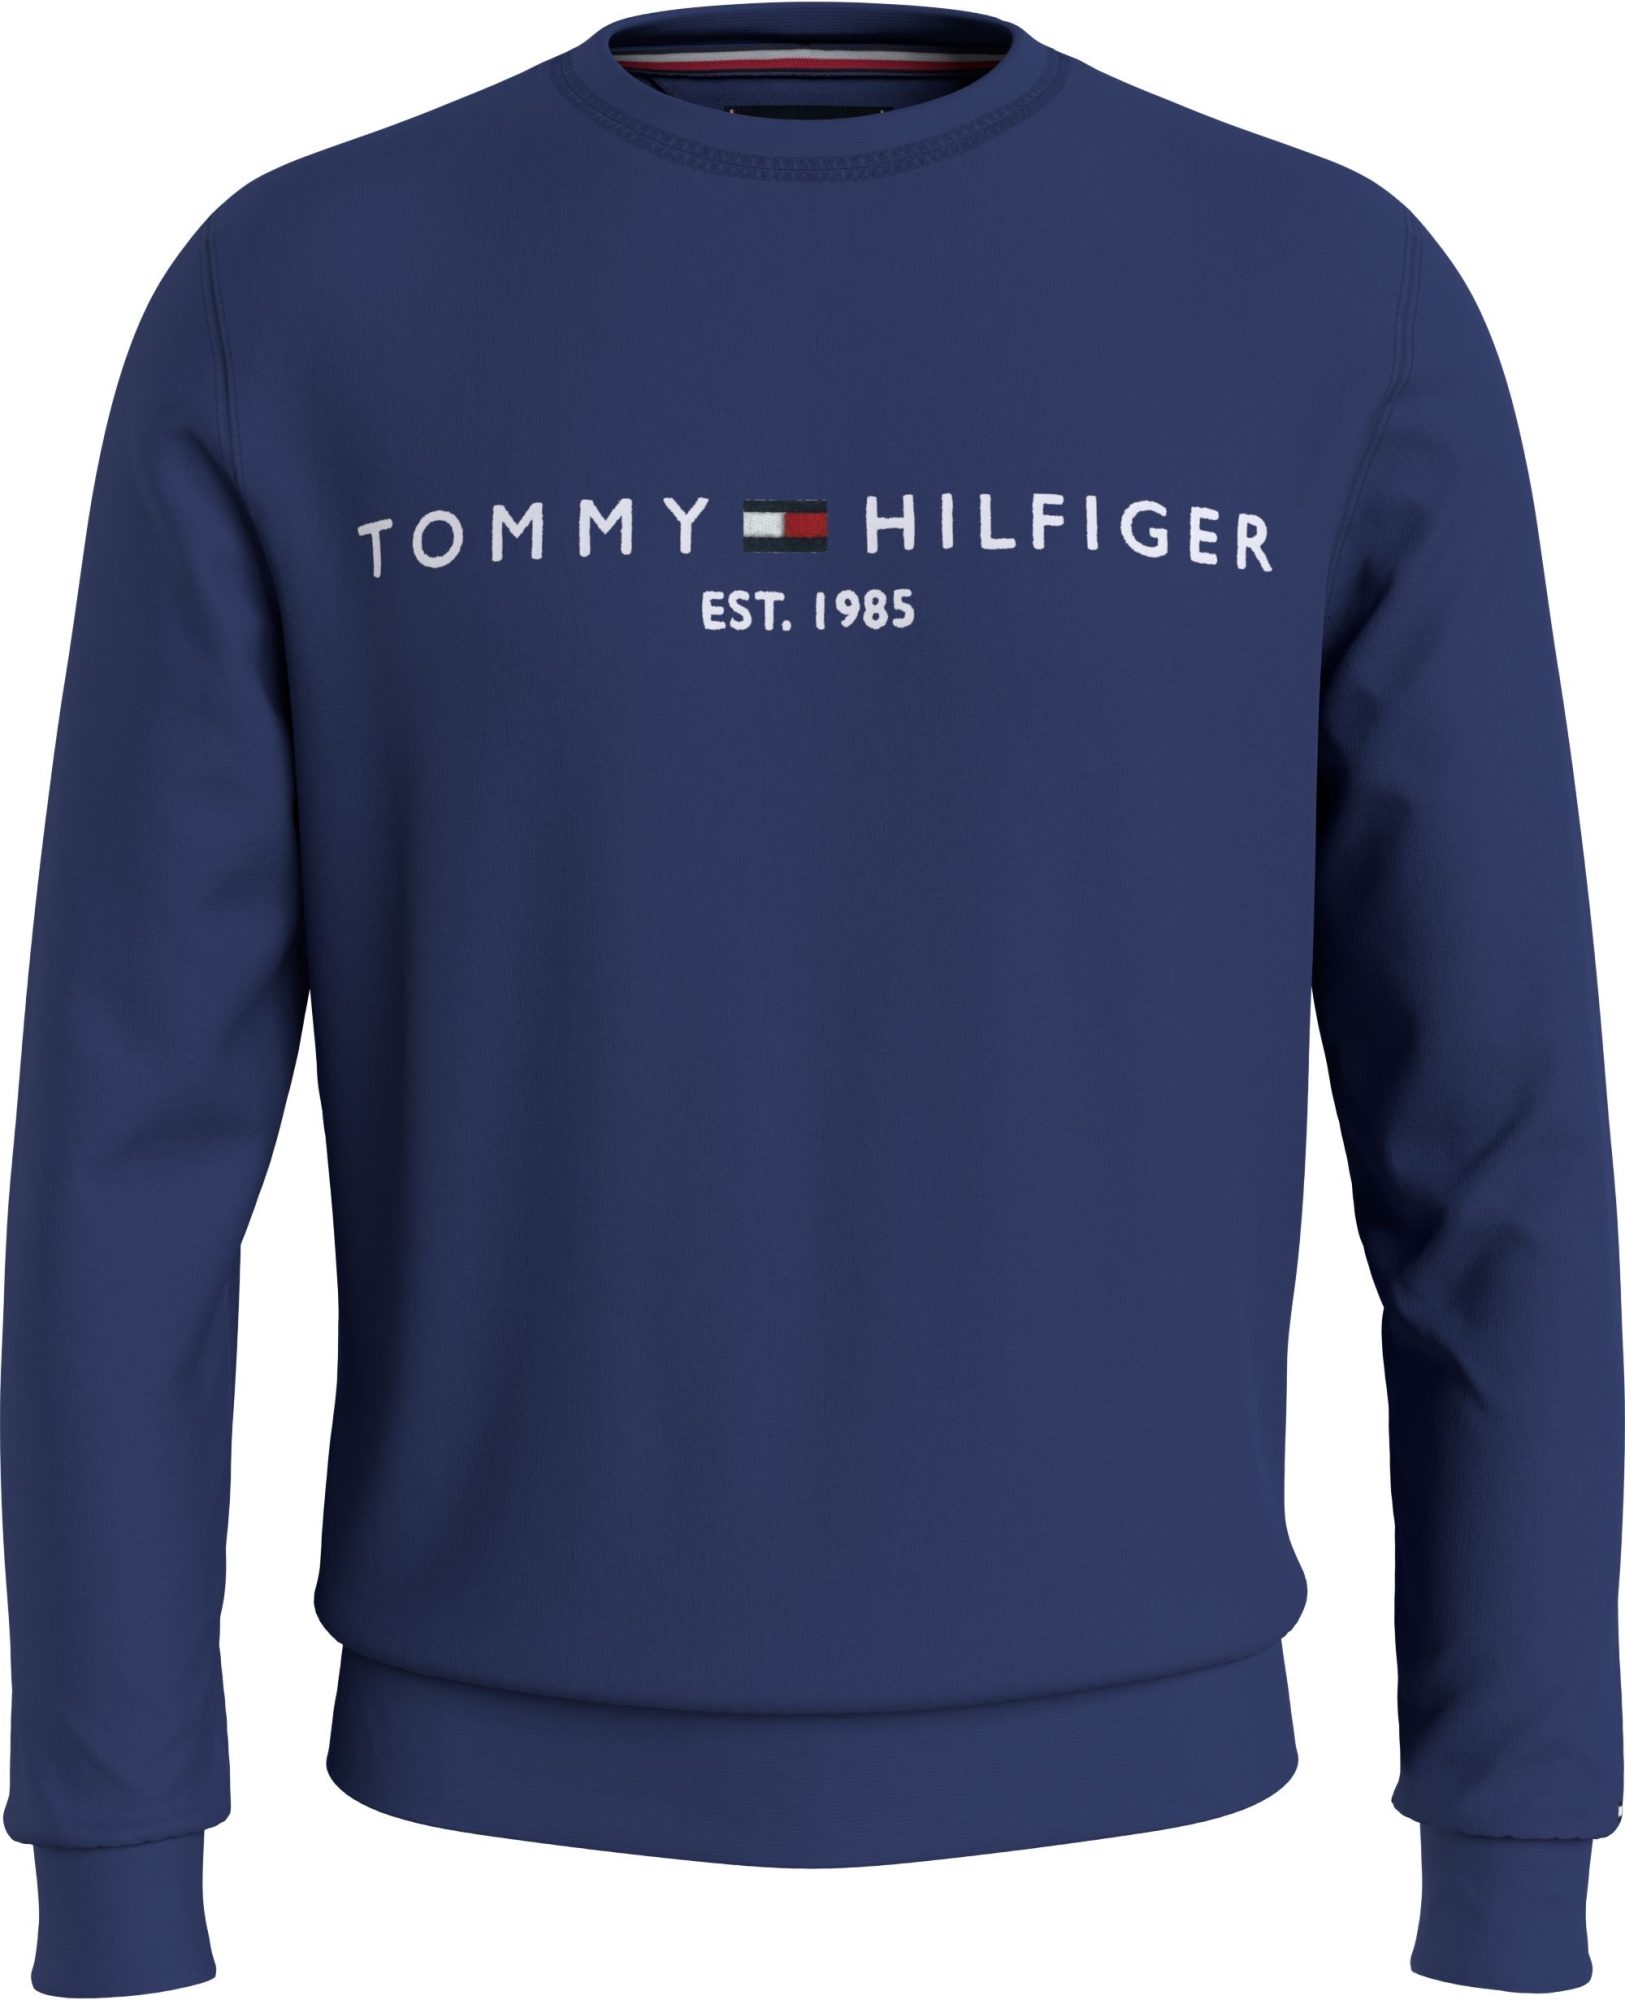 TOMMY HILFIGER LOGO SWEAT | Morans Menswear and Clothing, Thurles, Co ...